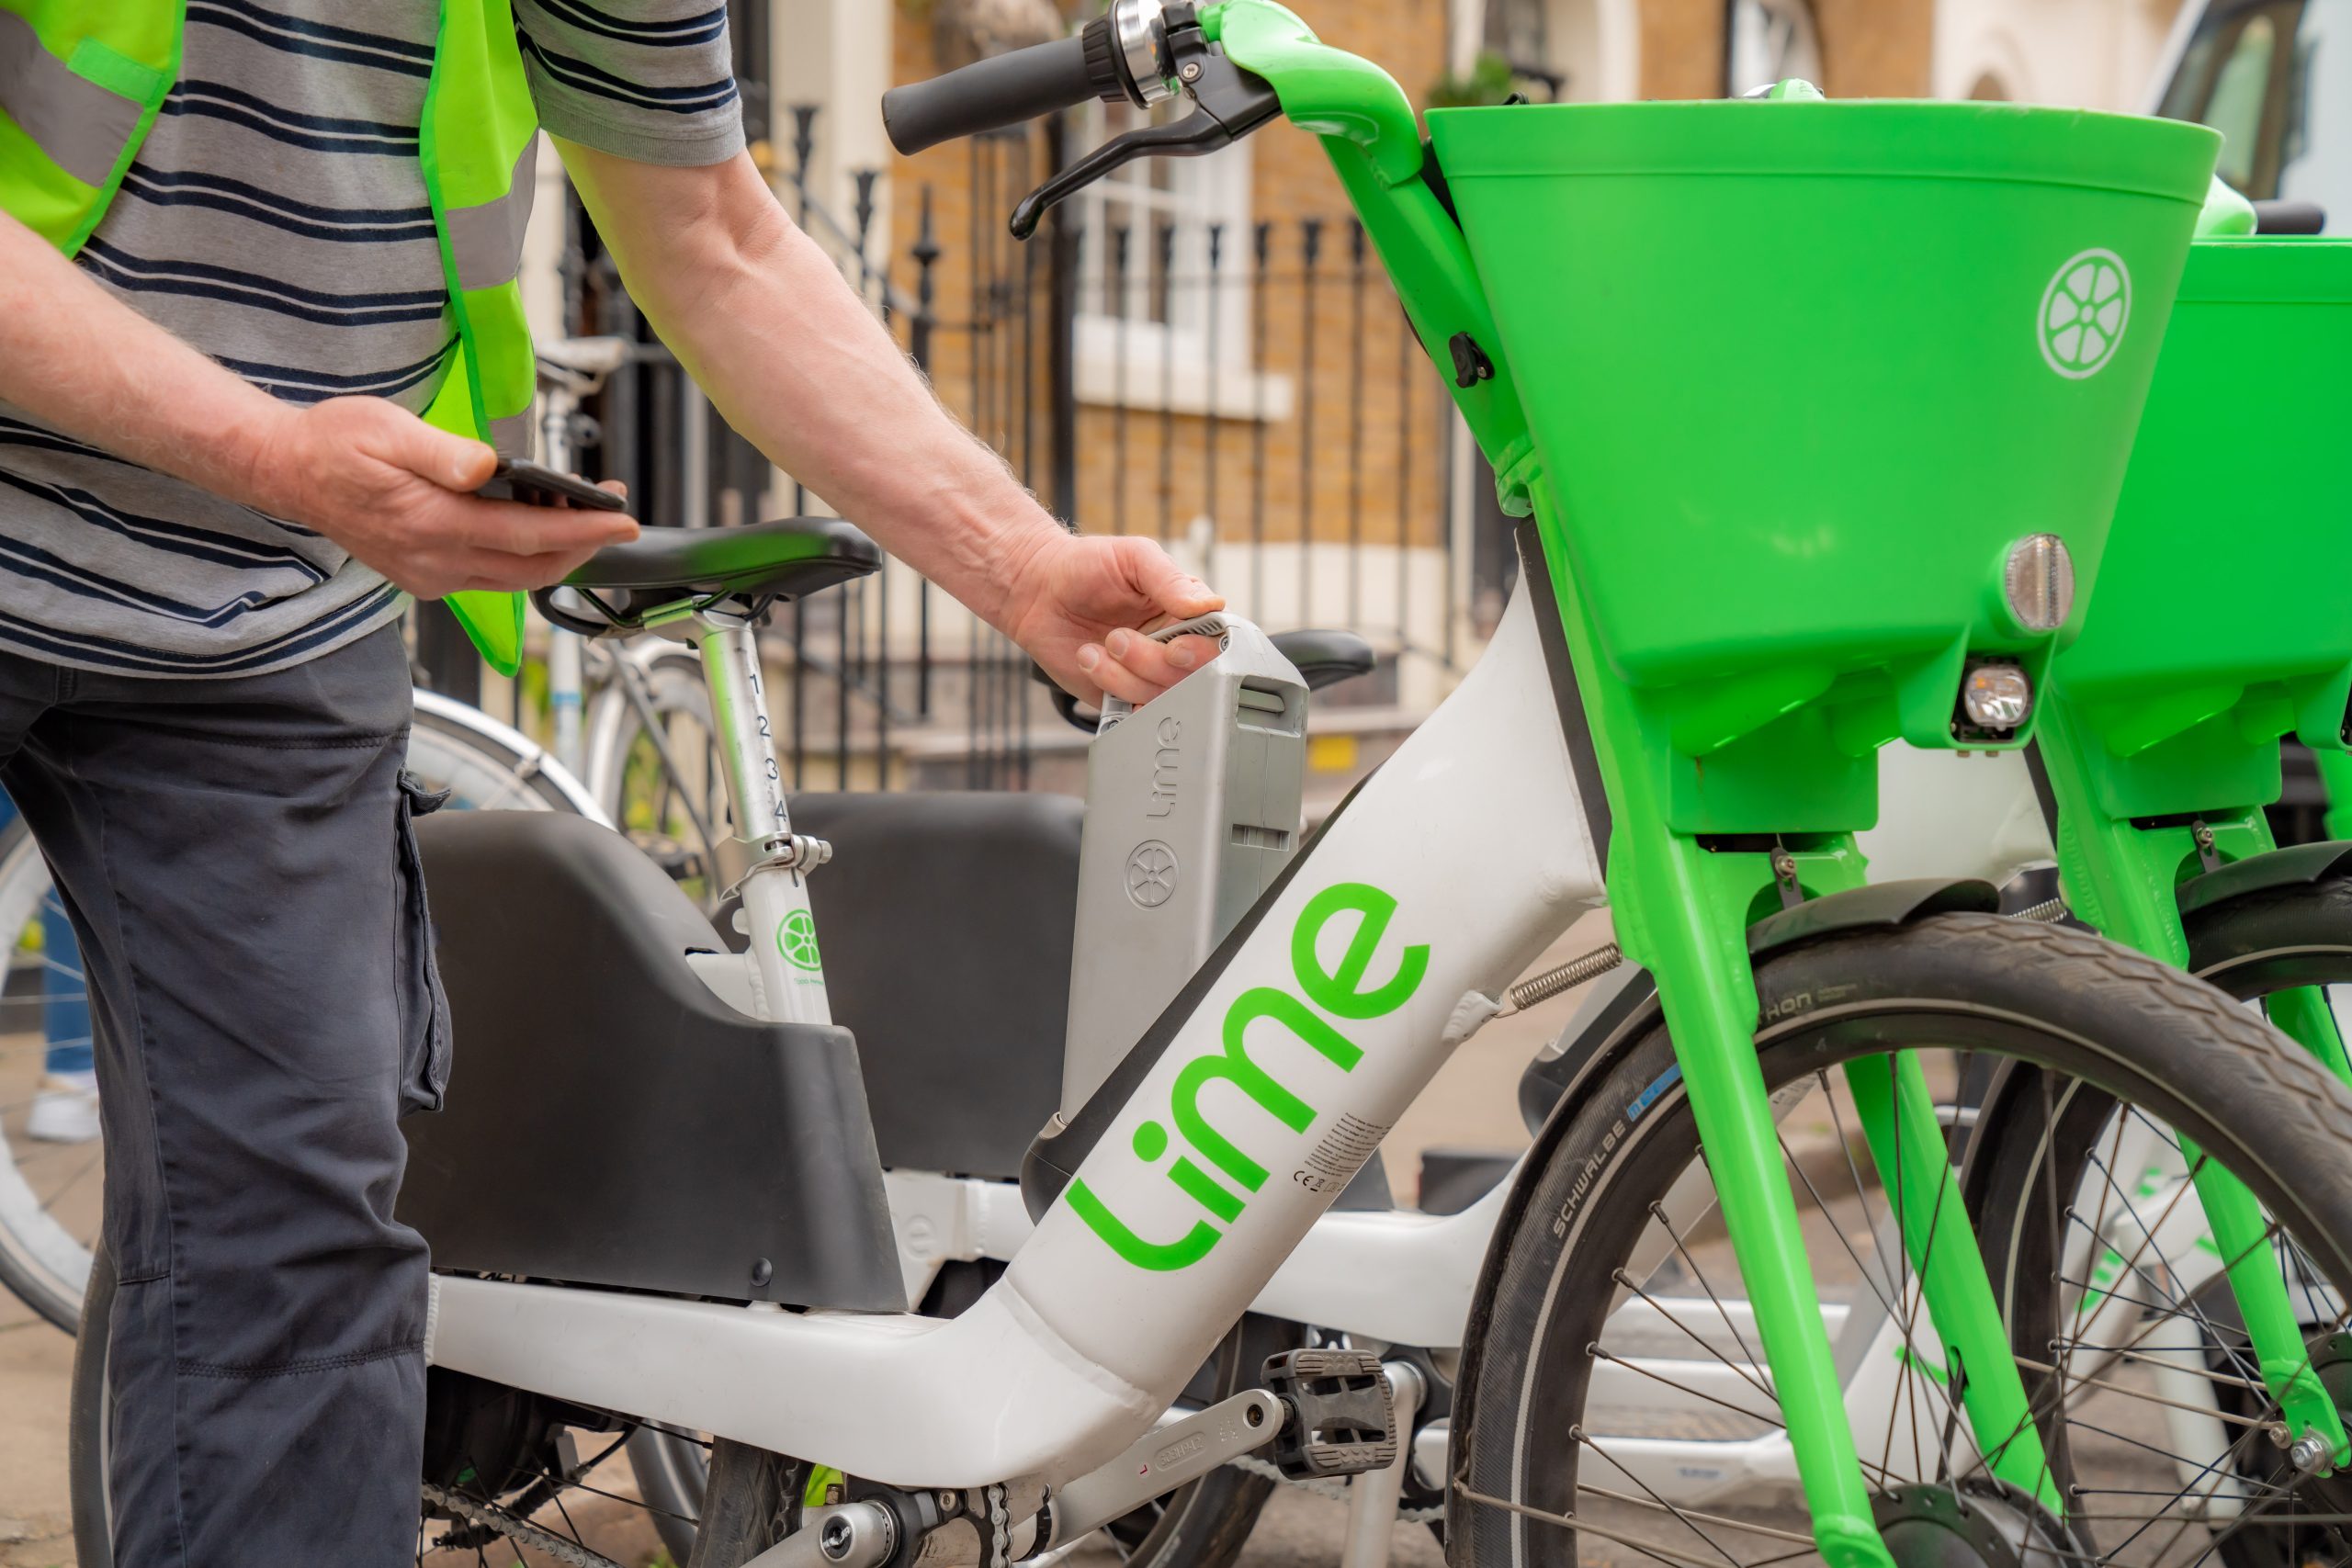 London gets Lime’s new Gen4 e-bikes with interchangeable batteries